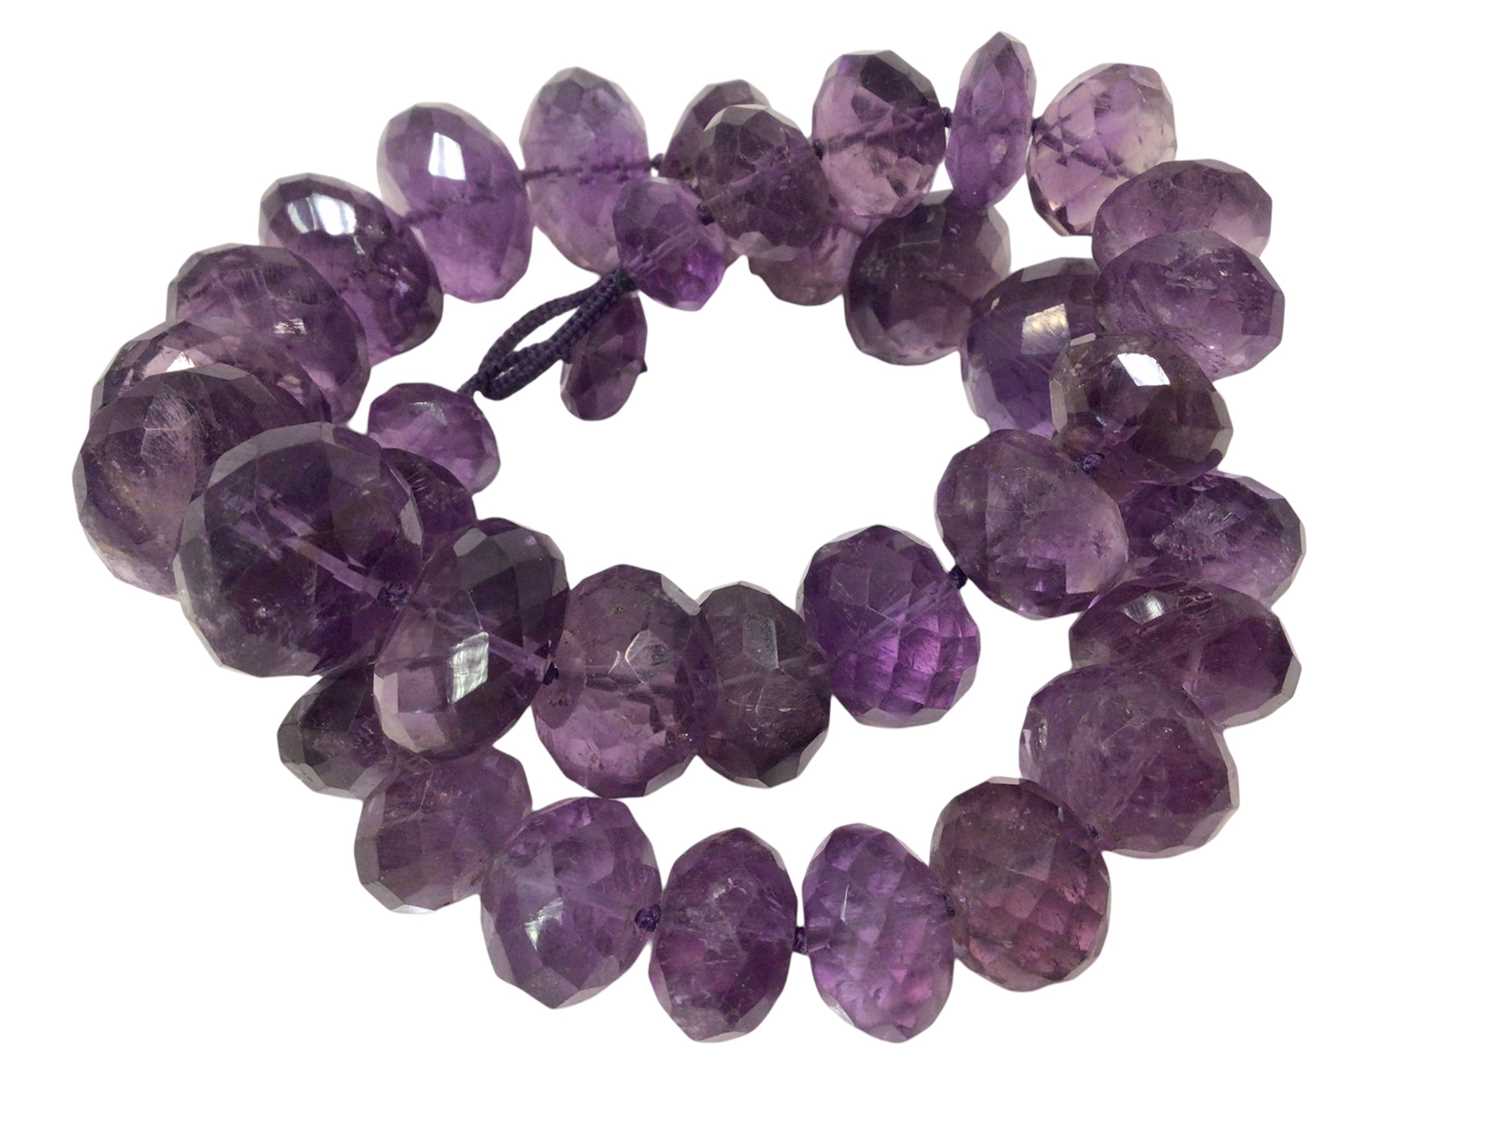 Amethyst bead necklace with a string of graduated faceted amethyst beads - Image 3 of 4